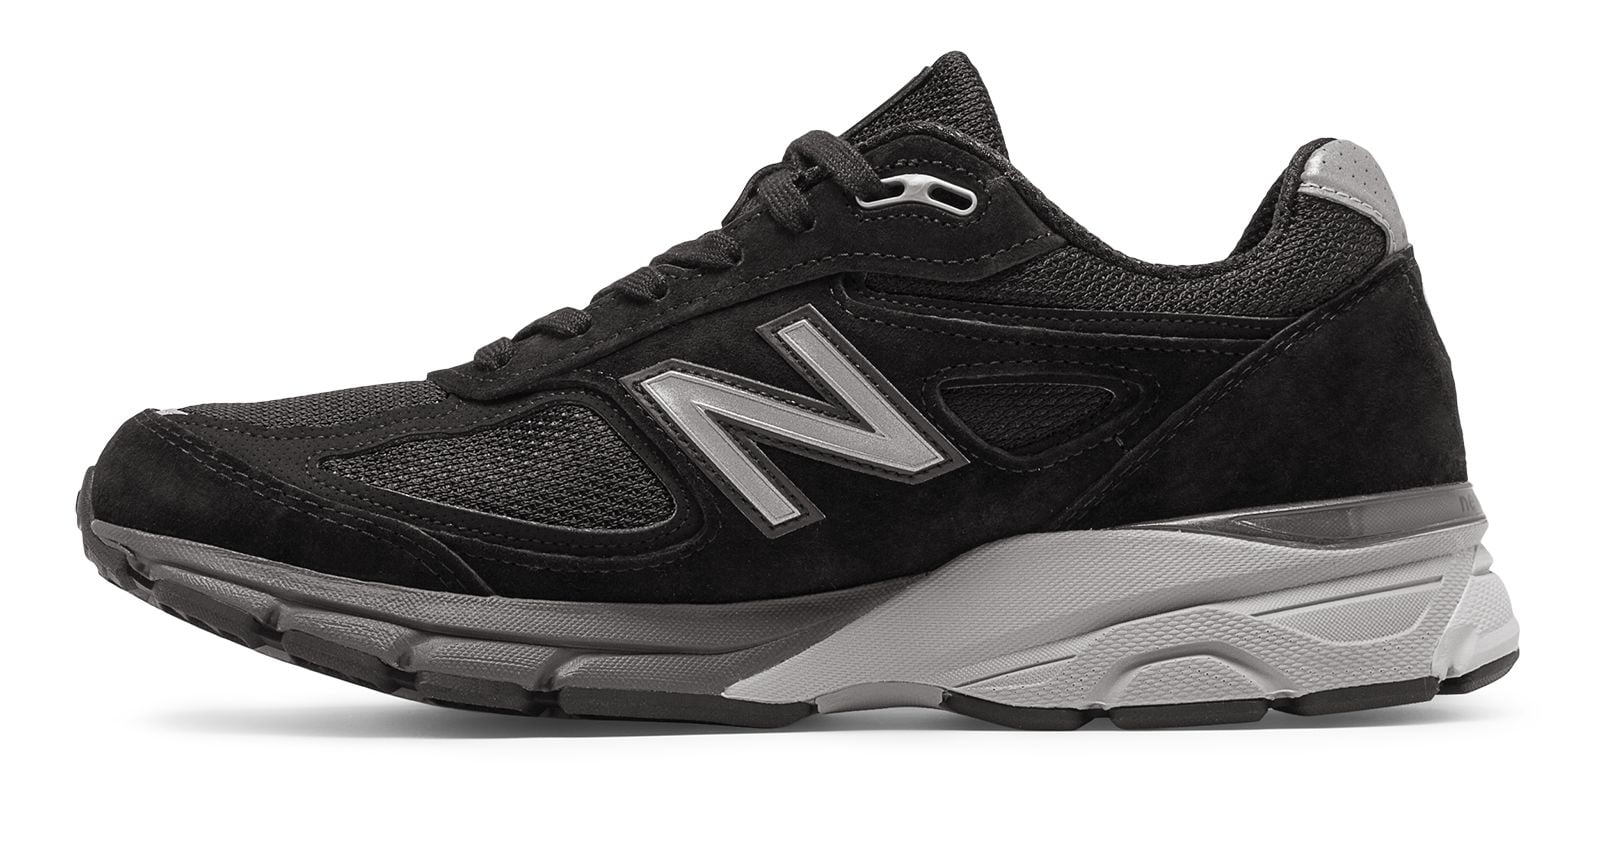 New Balance 990v4 Made in US Black with Silver - Walmart.com